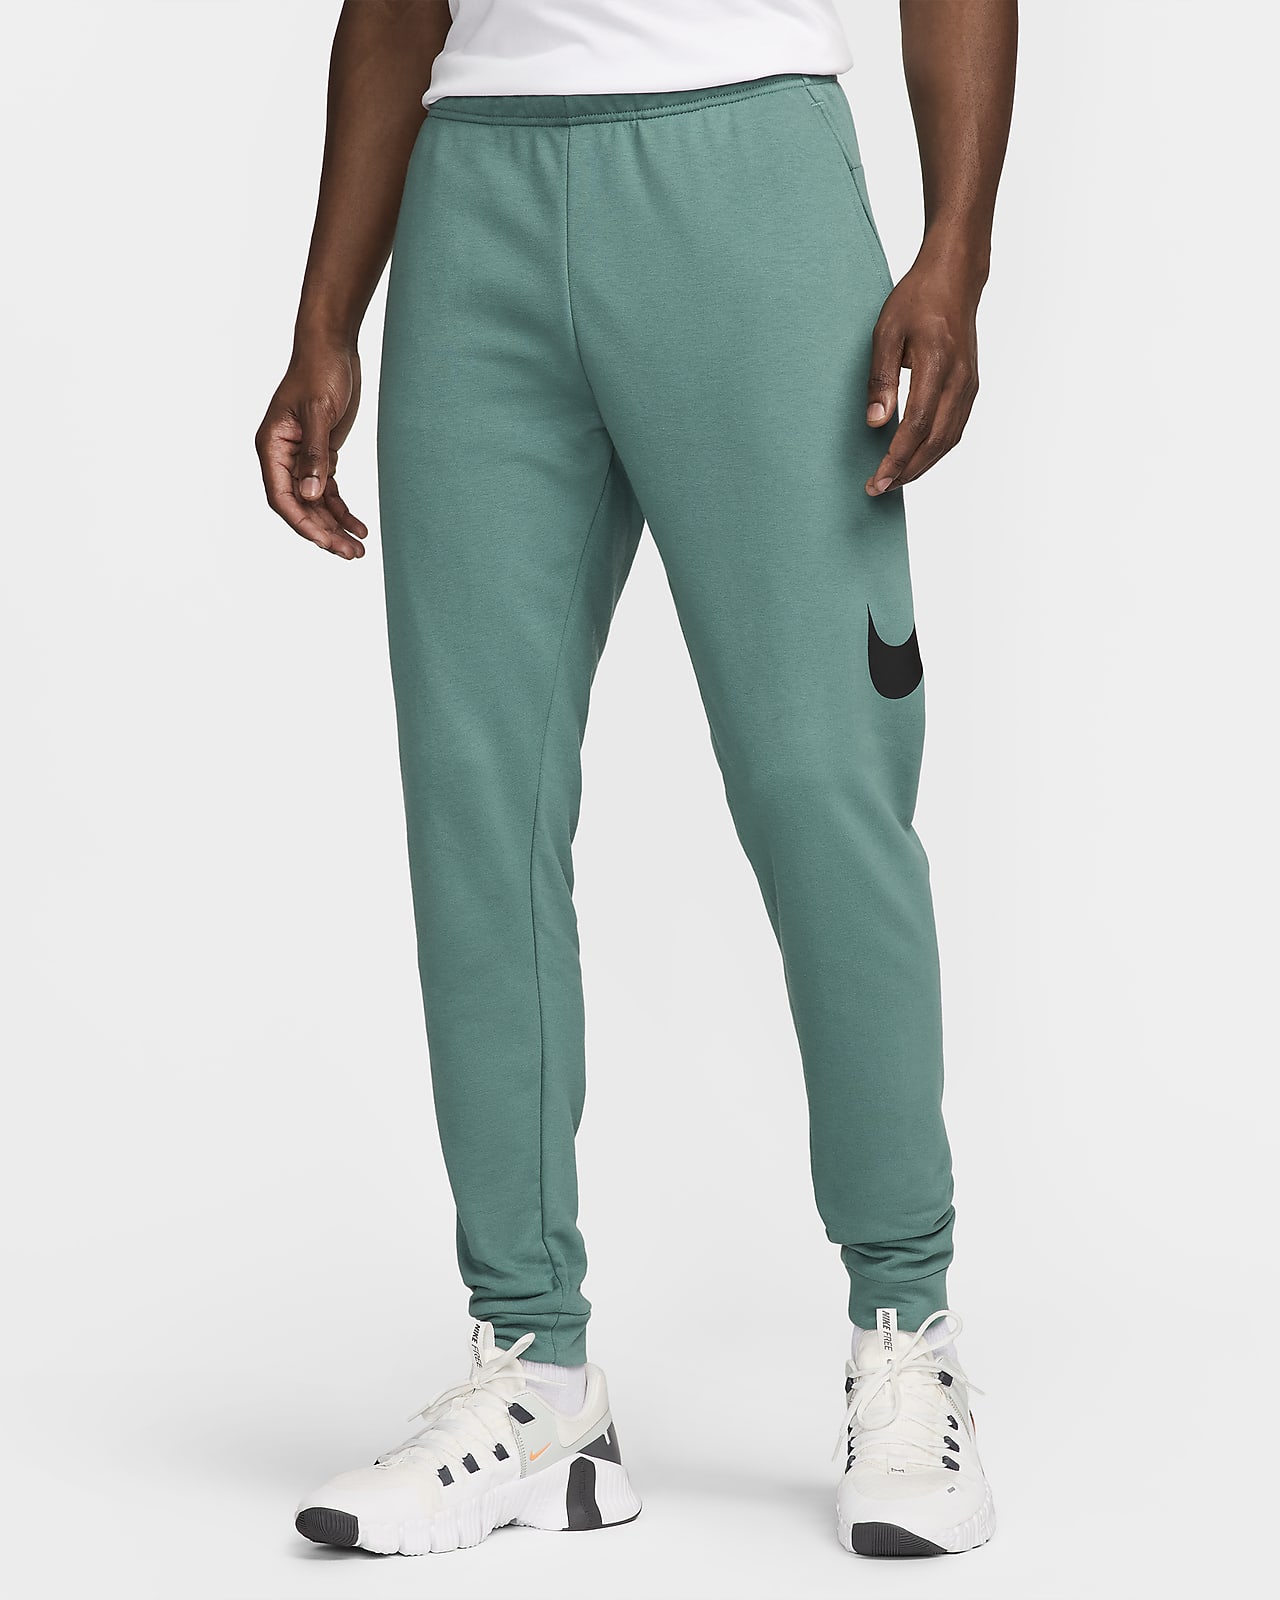 Nike Dry Graphic Pantalons cenyits Dri-FIT de fitnes - Home